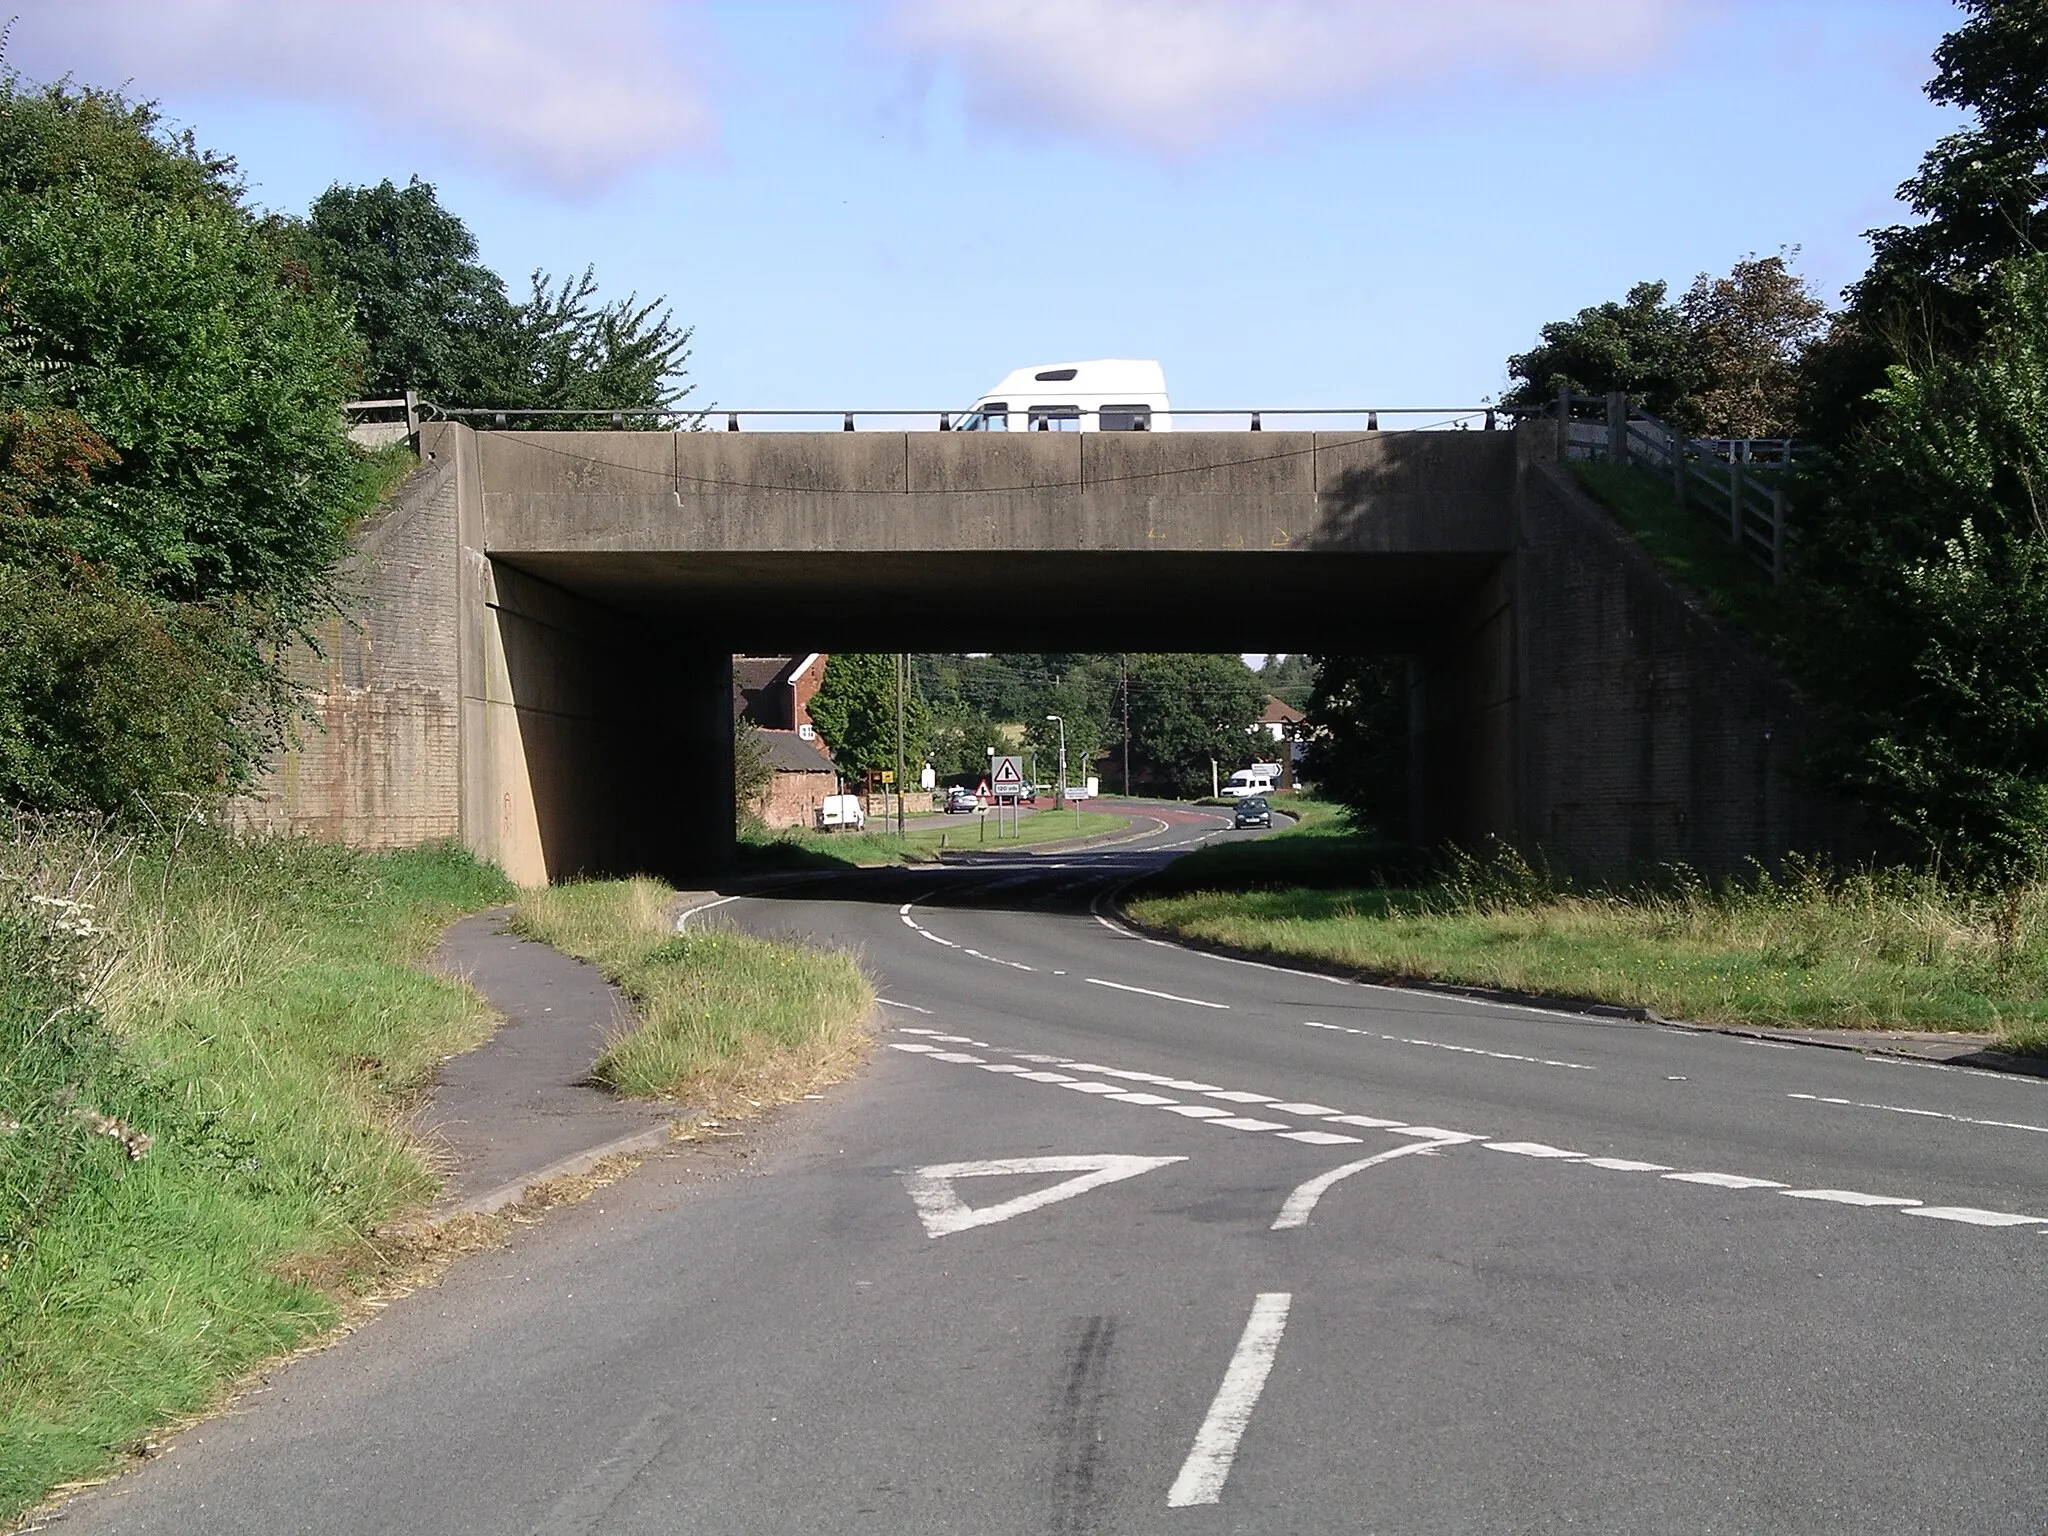 Photo showing: Photo of the bridge for the M6 motorway in Corley, Warwickshire, England.